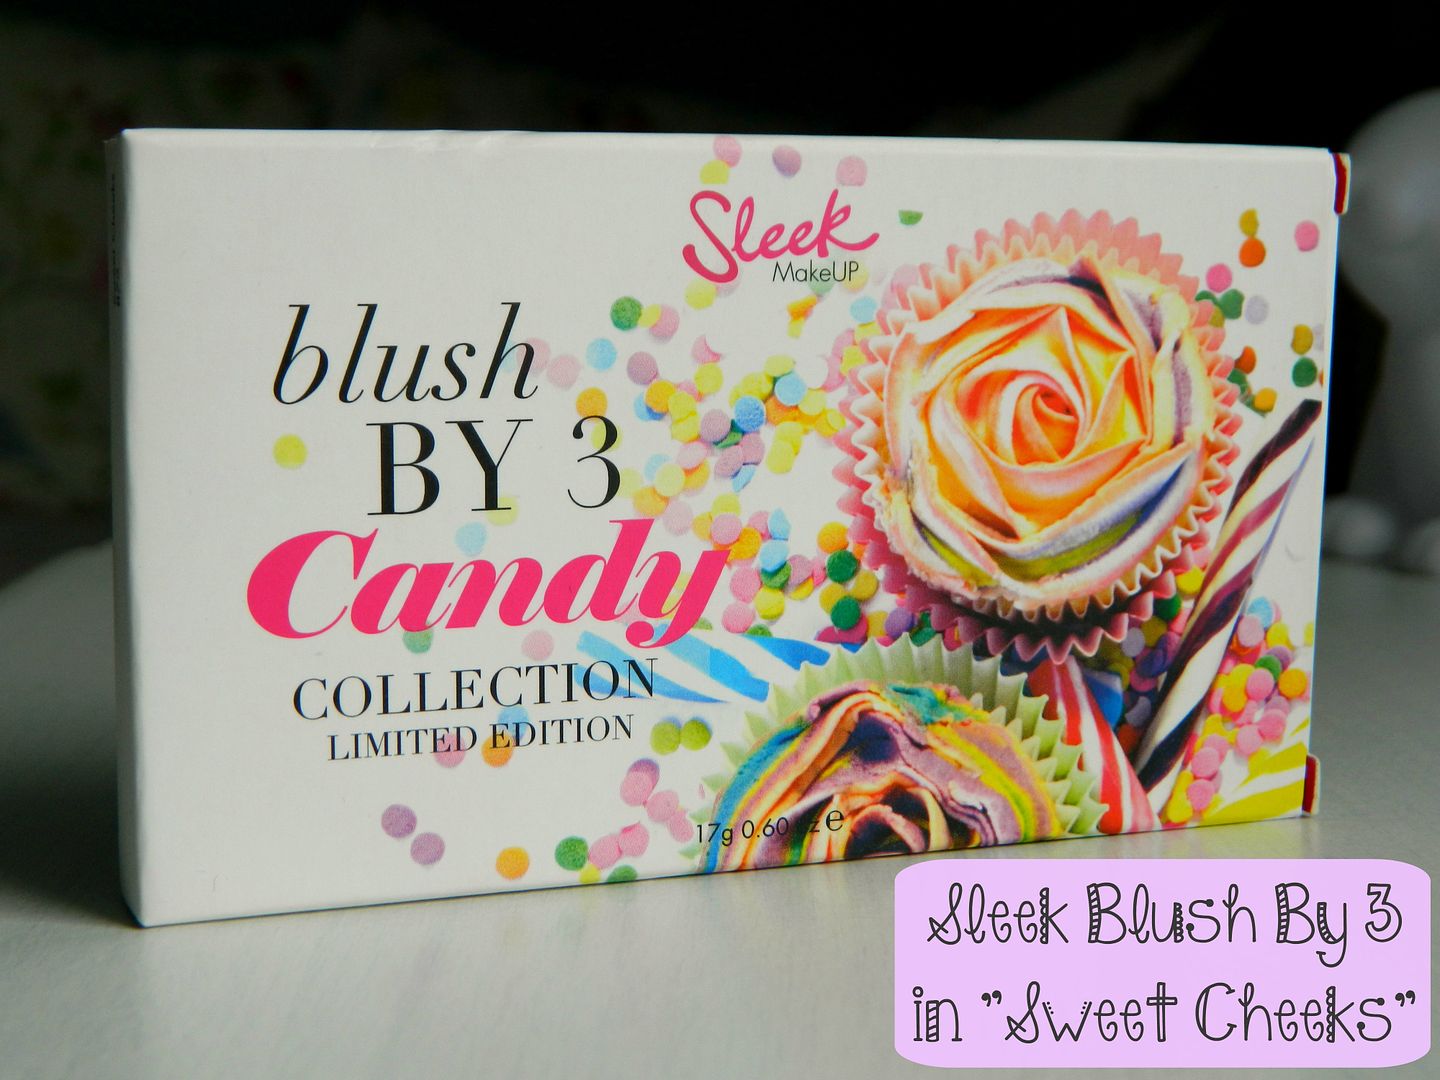 Sleek Blush By 3 in Sweet Cheeks Candy Collection Review Belle-amie